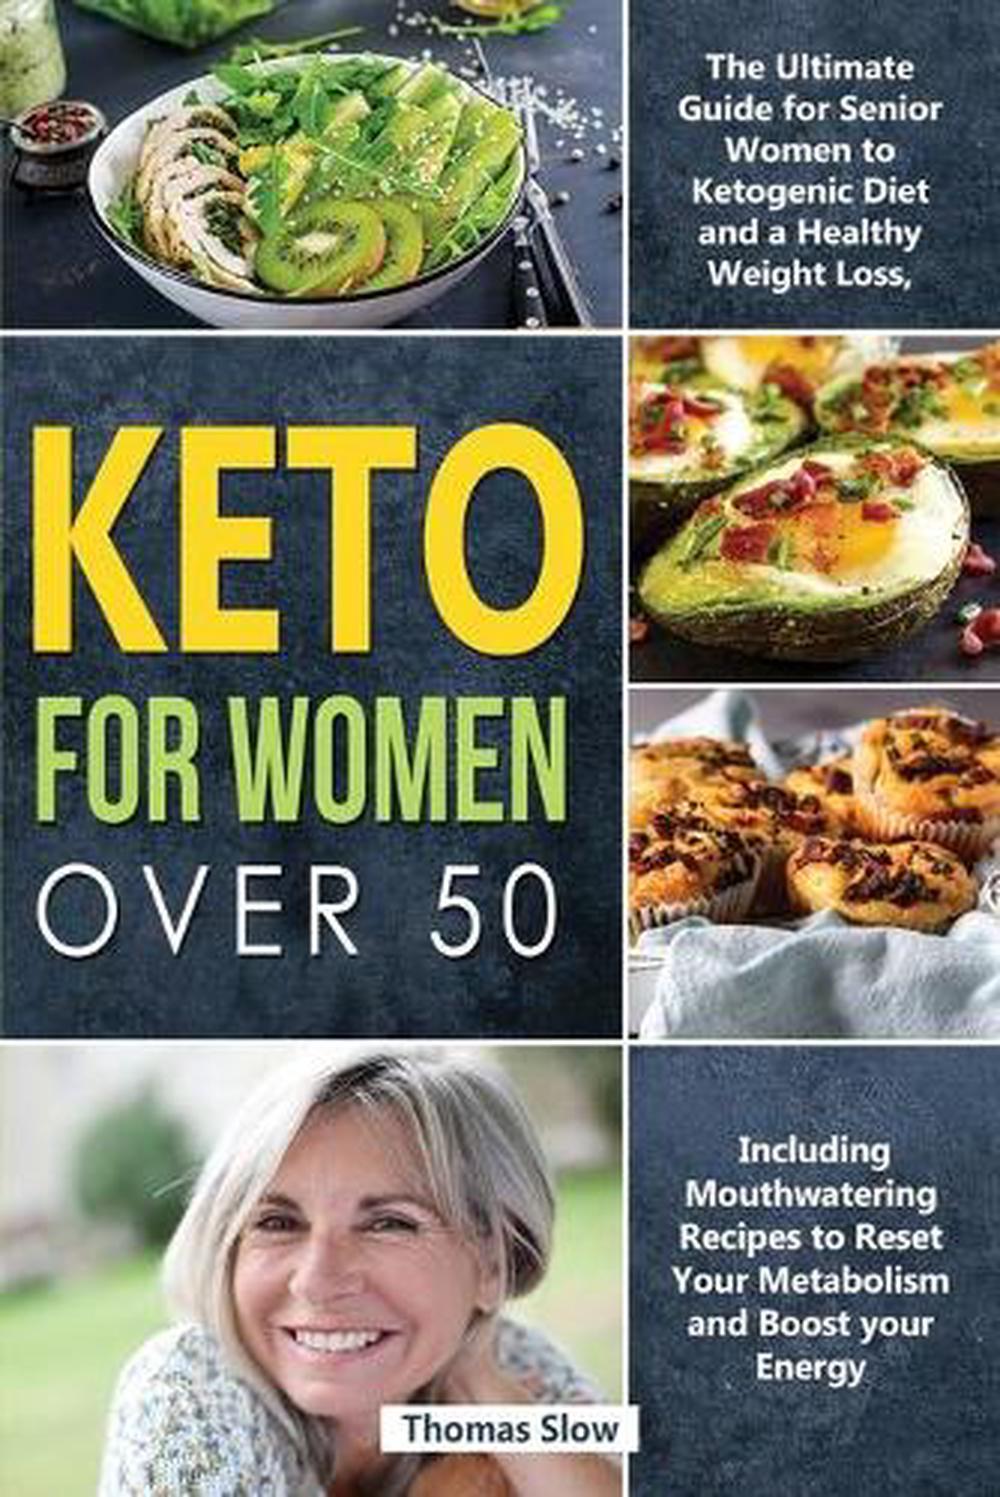 Keto for Women Over 50 by Slow Thomas Slow (English) Paperback Book ...